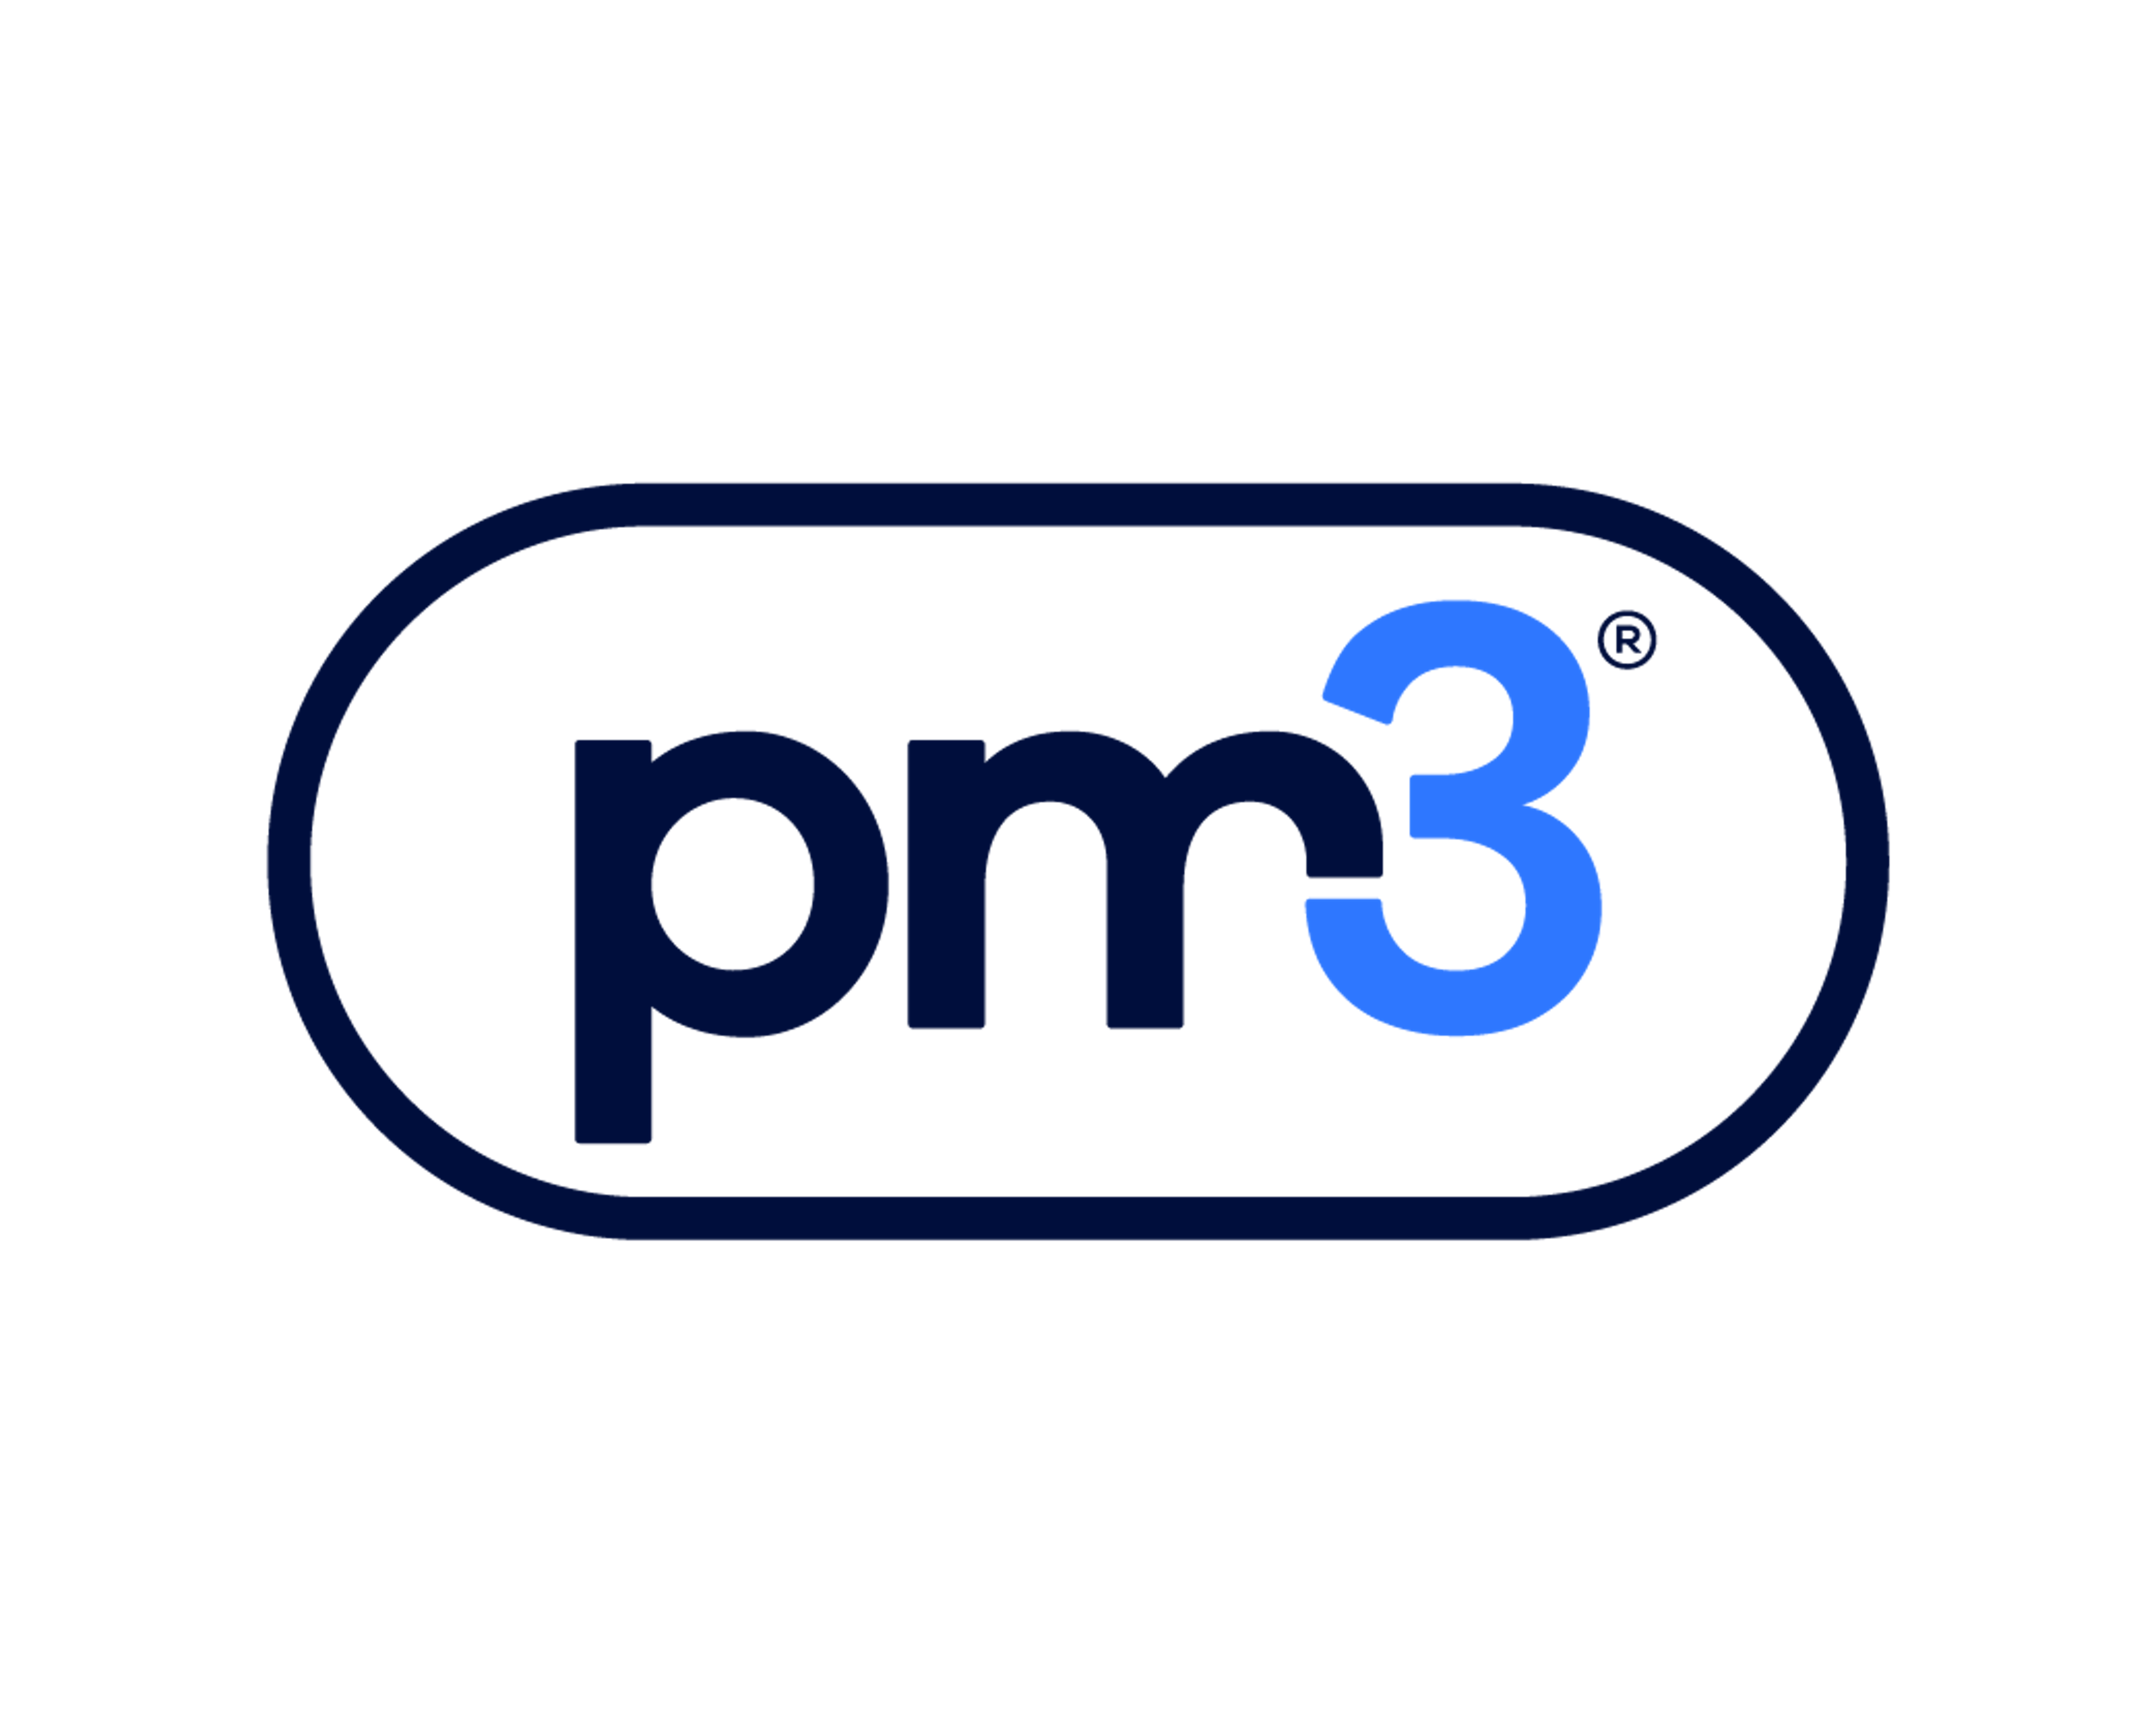 Pm3 Pricing Features Reviews And Alternatives Getapp